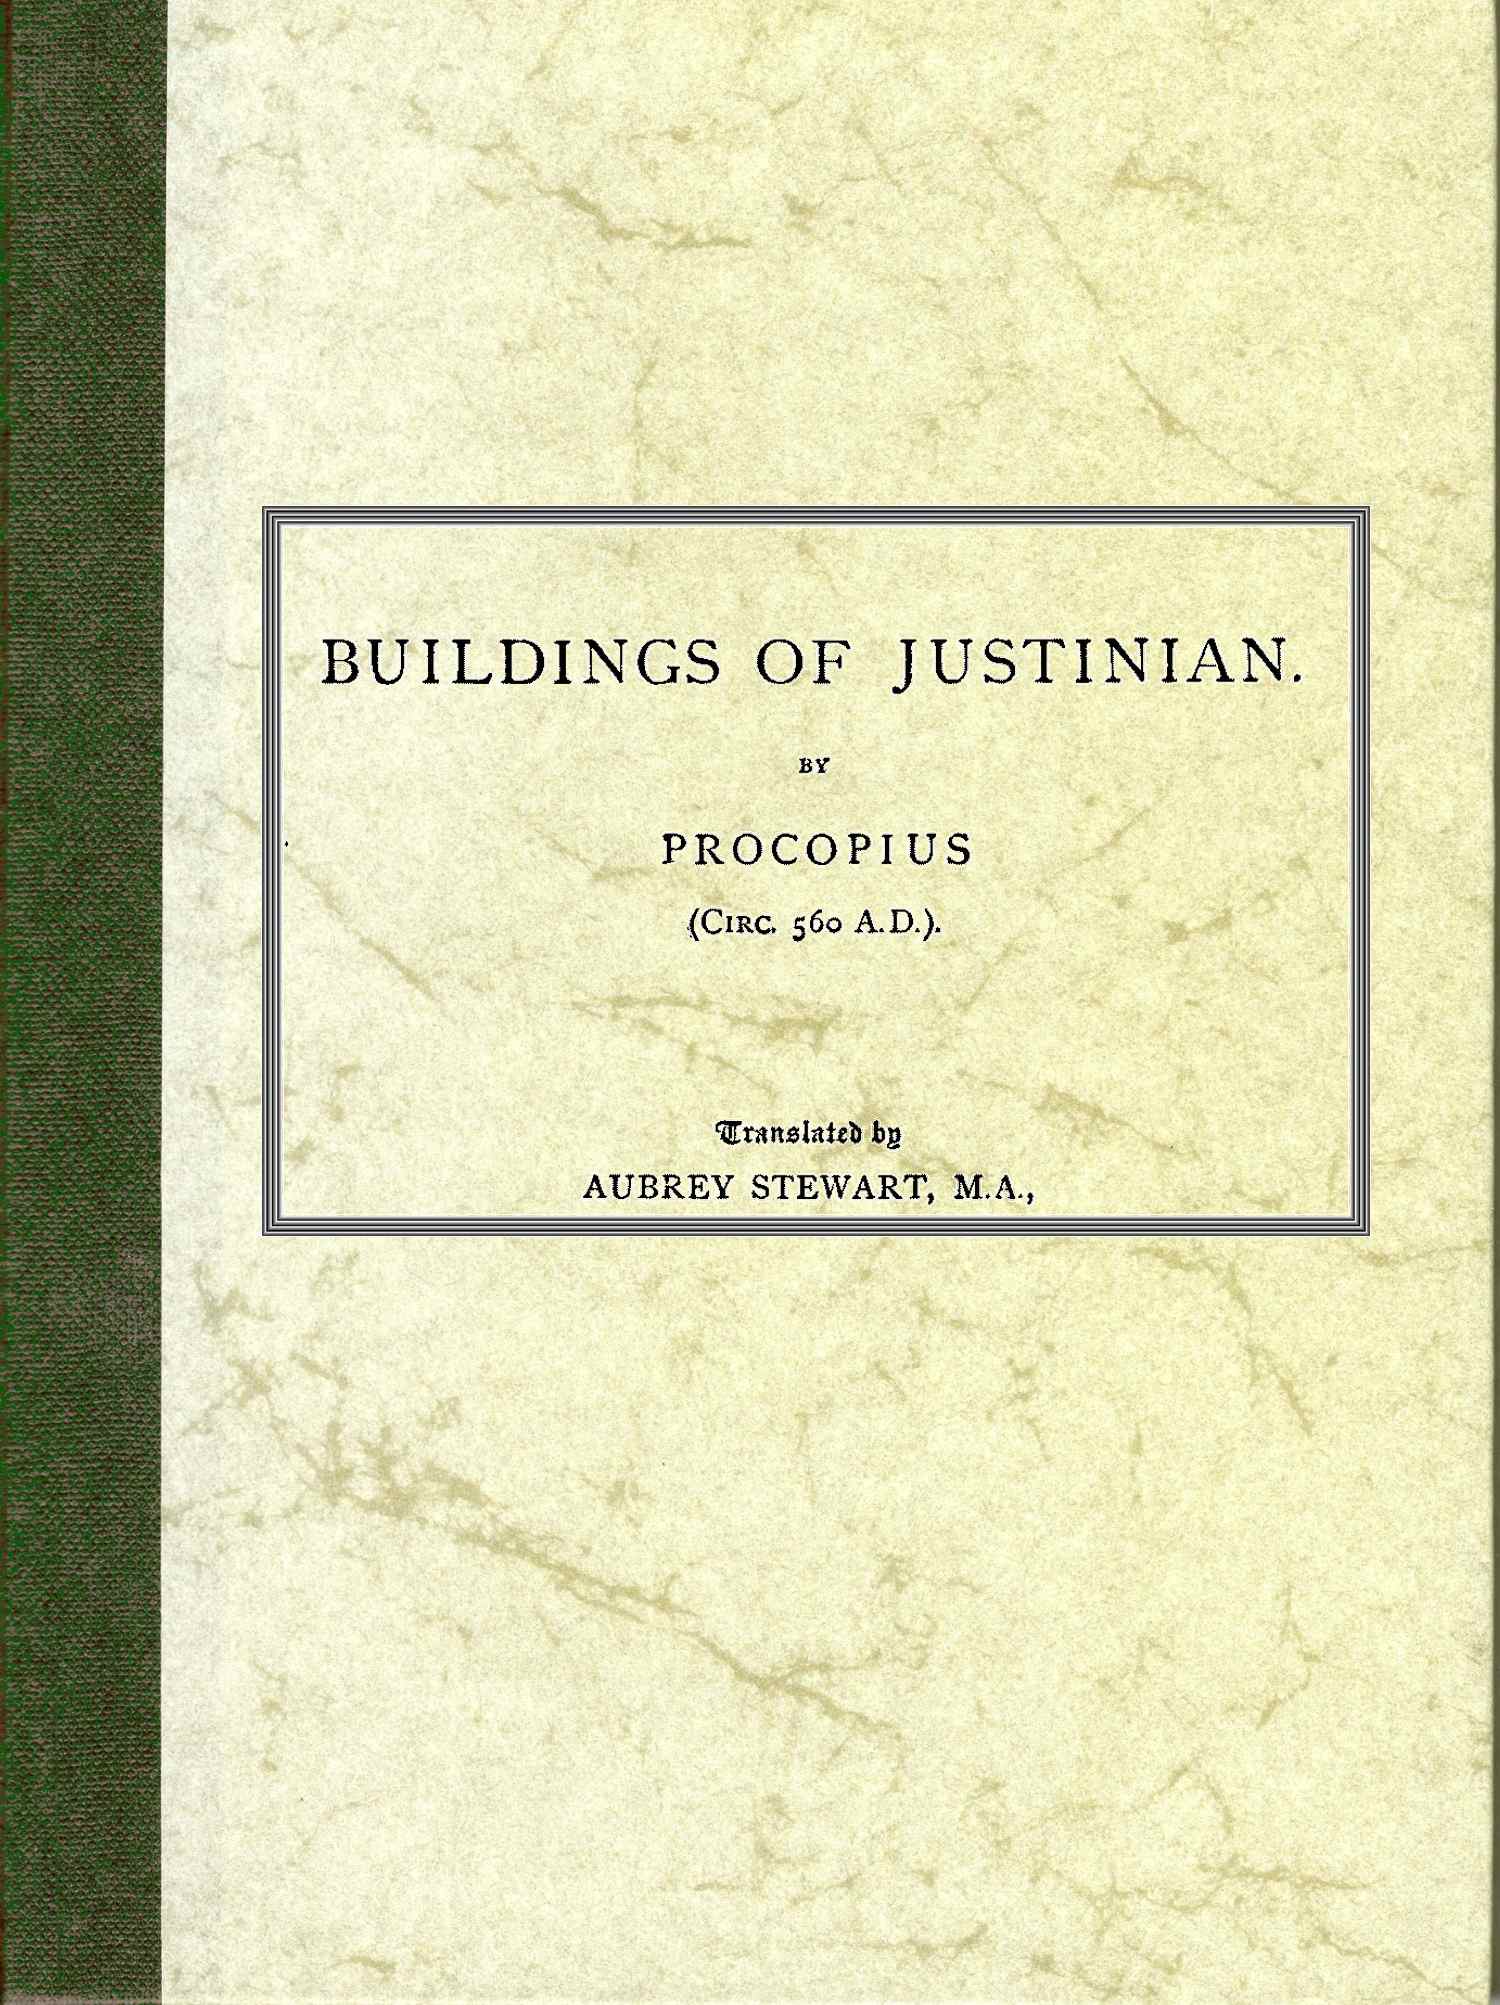 Of the Buildings of Justinian